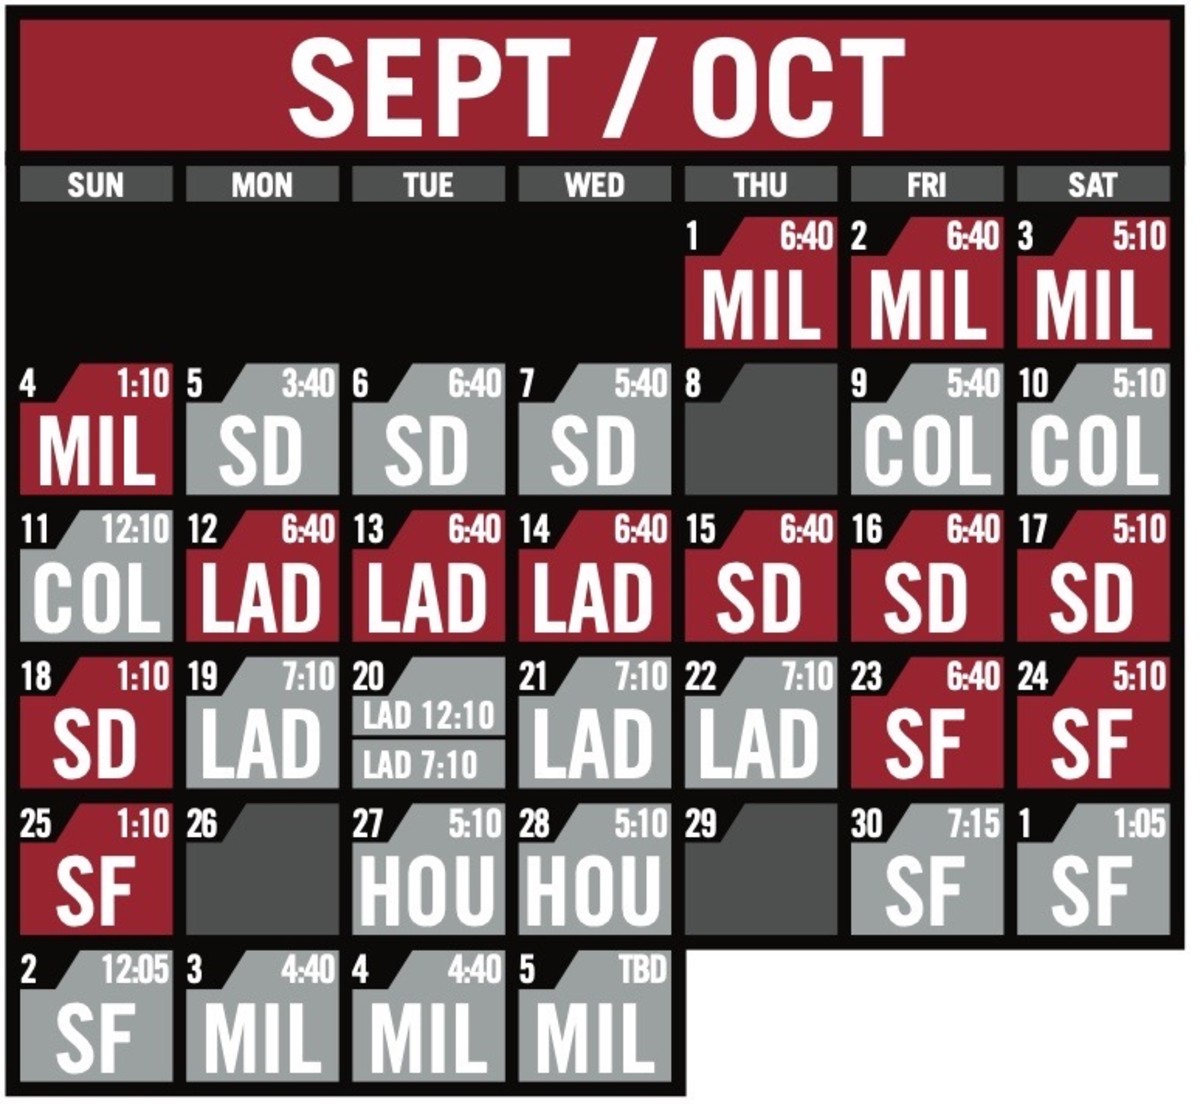 The Diamondbacks schedule for September and October 2022.